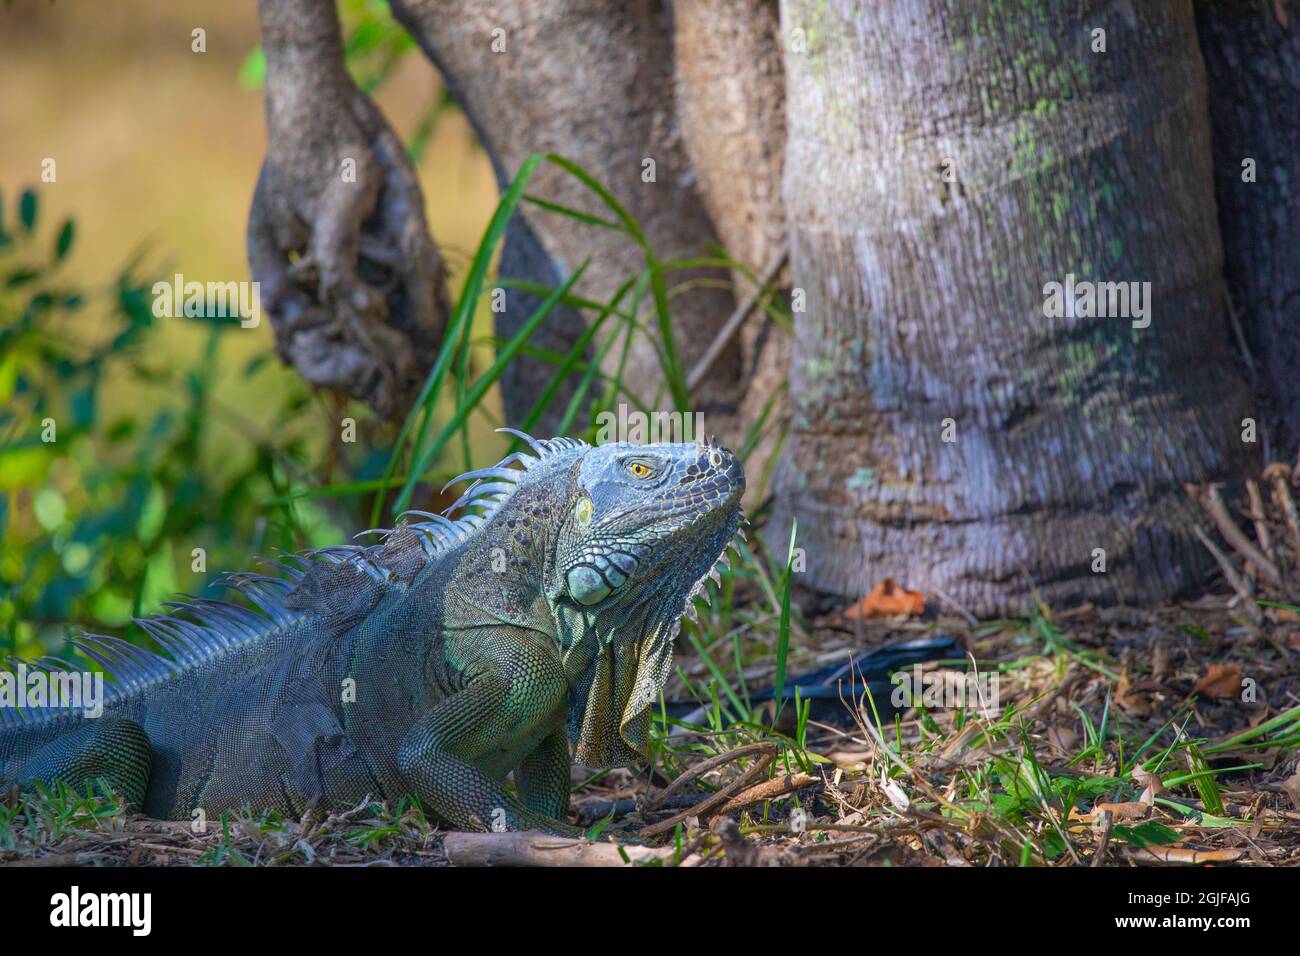 A big iguana gets ready to climb up a tree but stops to pose for a quick photo. Photographed in Fort Lauderdale, Florida. Stock Photo